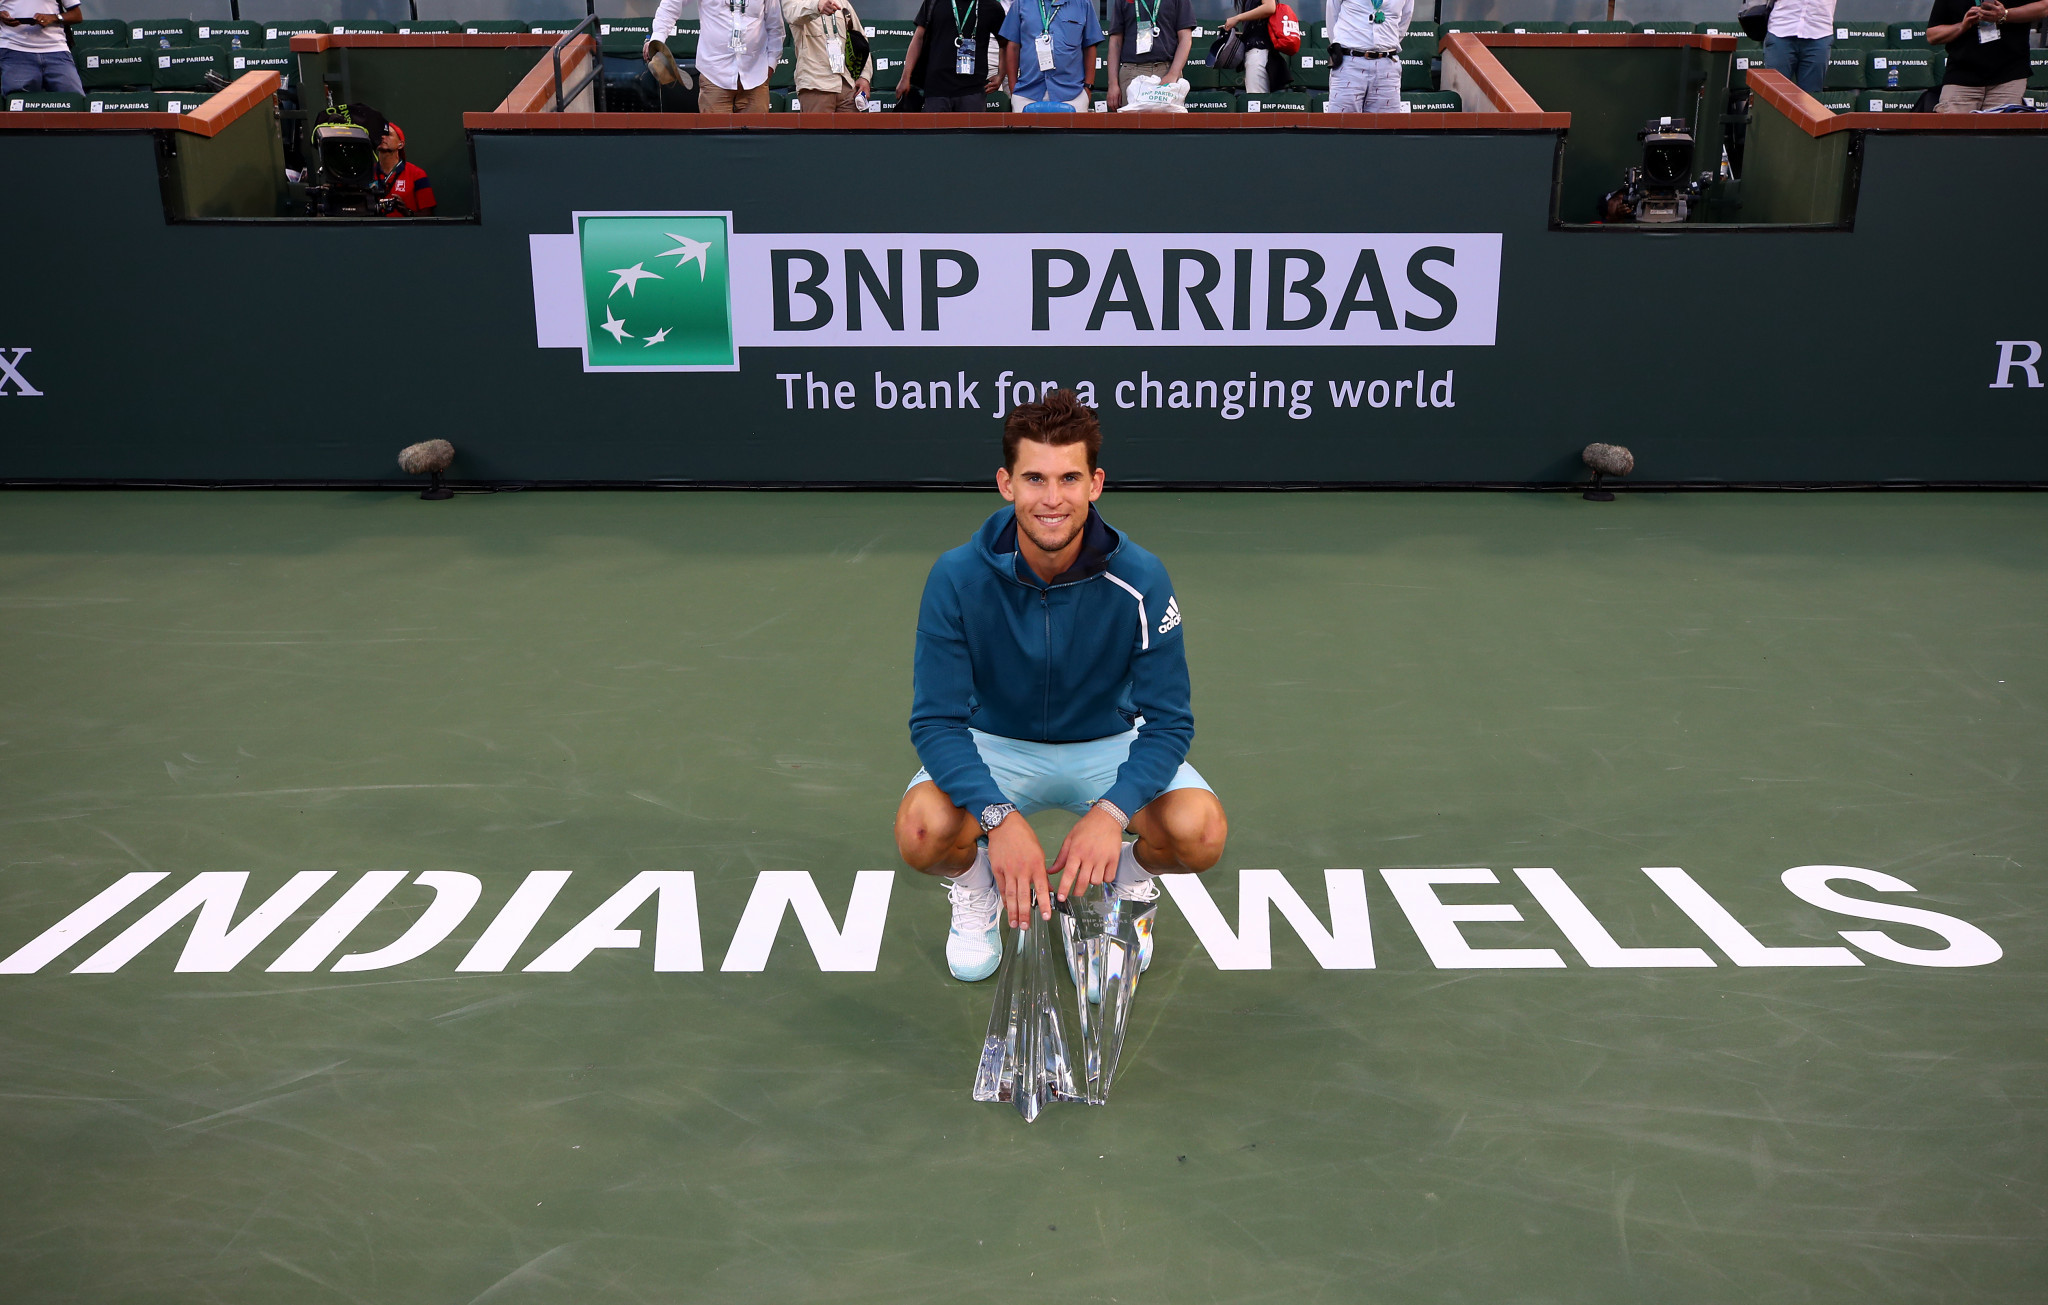 Dominic Thiem is the defending men's champion in the BNP Paribas Open, postponed because of the coronavirus pandemic ©Getty Images